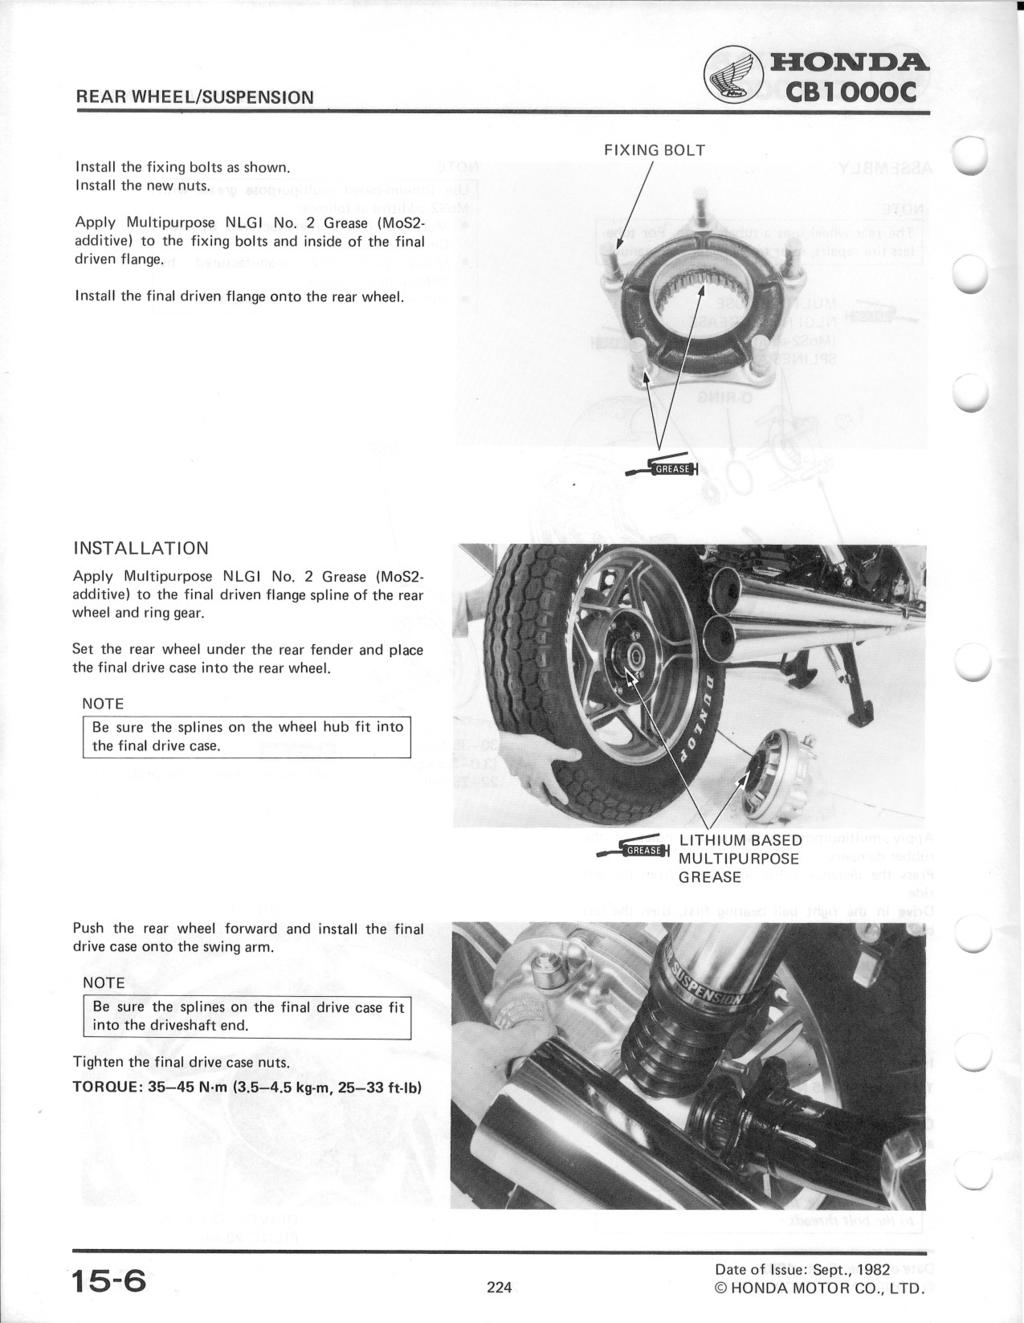 ~ :H:OlVD.A. CB1000C Install the fixing bolts as shown. Install the new nuts. FIXING BOLT Apply Multipurpose NLGI No.2 Grease (MoS2 additive) to the fixing bolts and inside of the final driven flange.